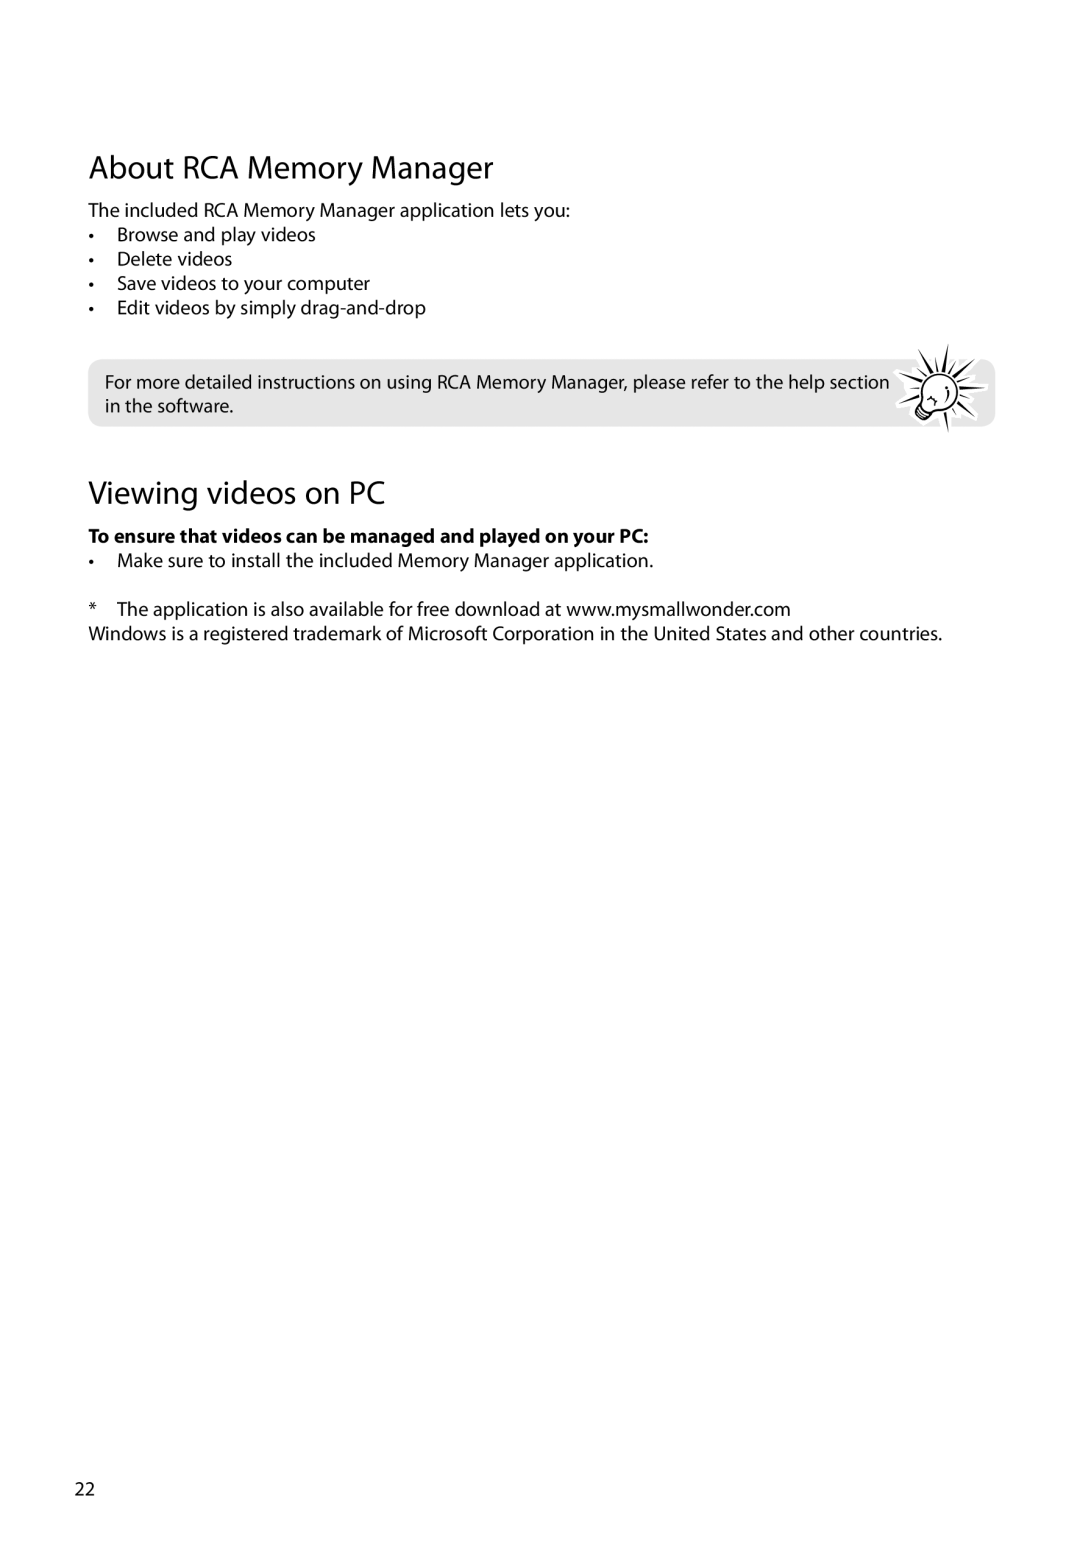 RCA EZ3000BKR About RCA Memory Manager, Viewing videos on PC, To ensure that videos can be managed and played on your PC 